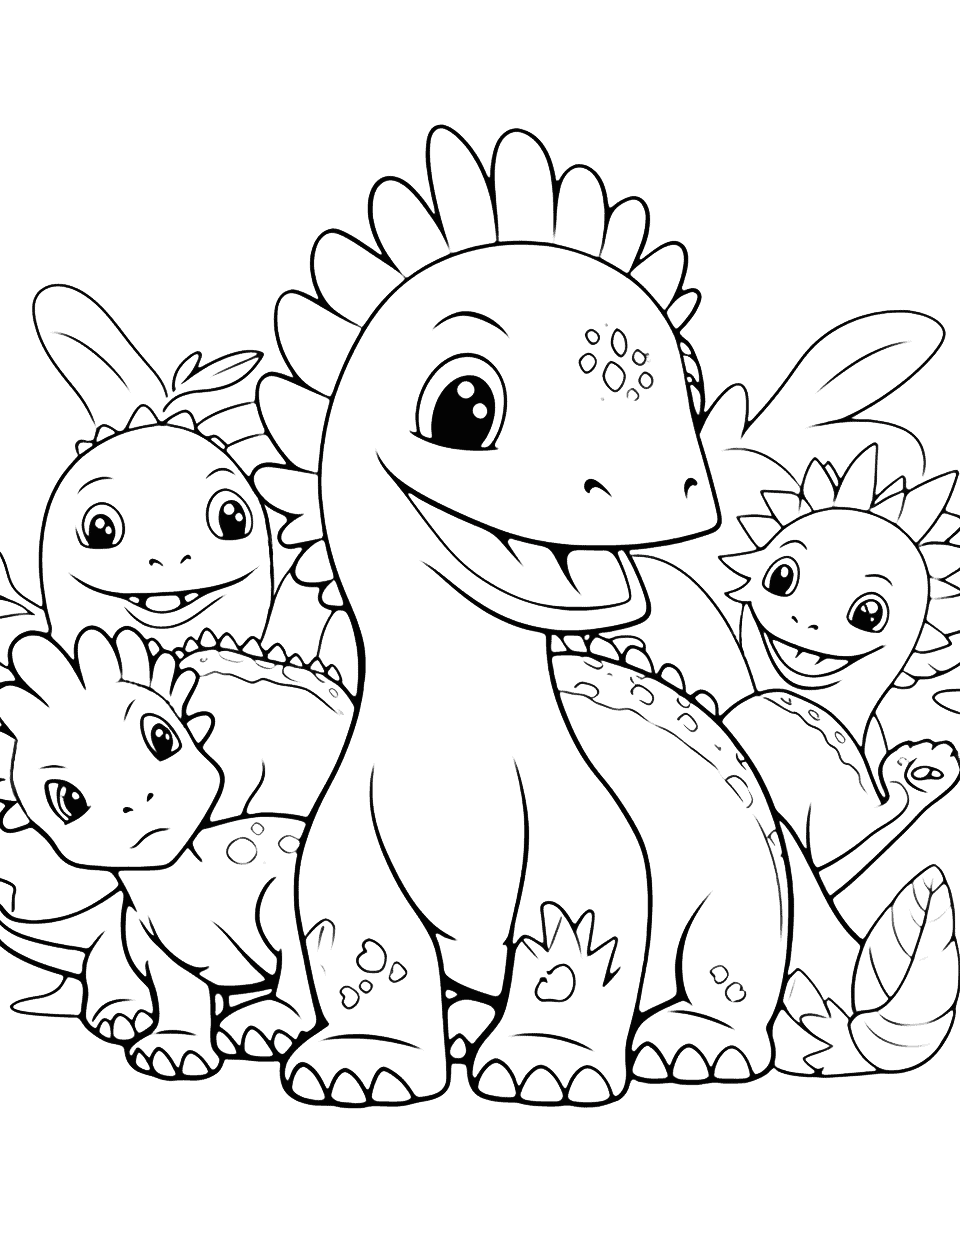 Cute Baby Dinosaurs Dinosaur Coloring Page - A collection of adorable baby dinosaurs playing together.